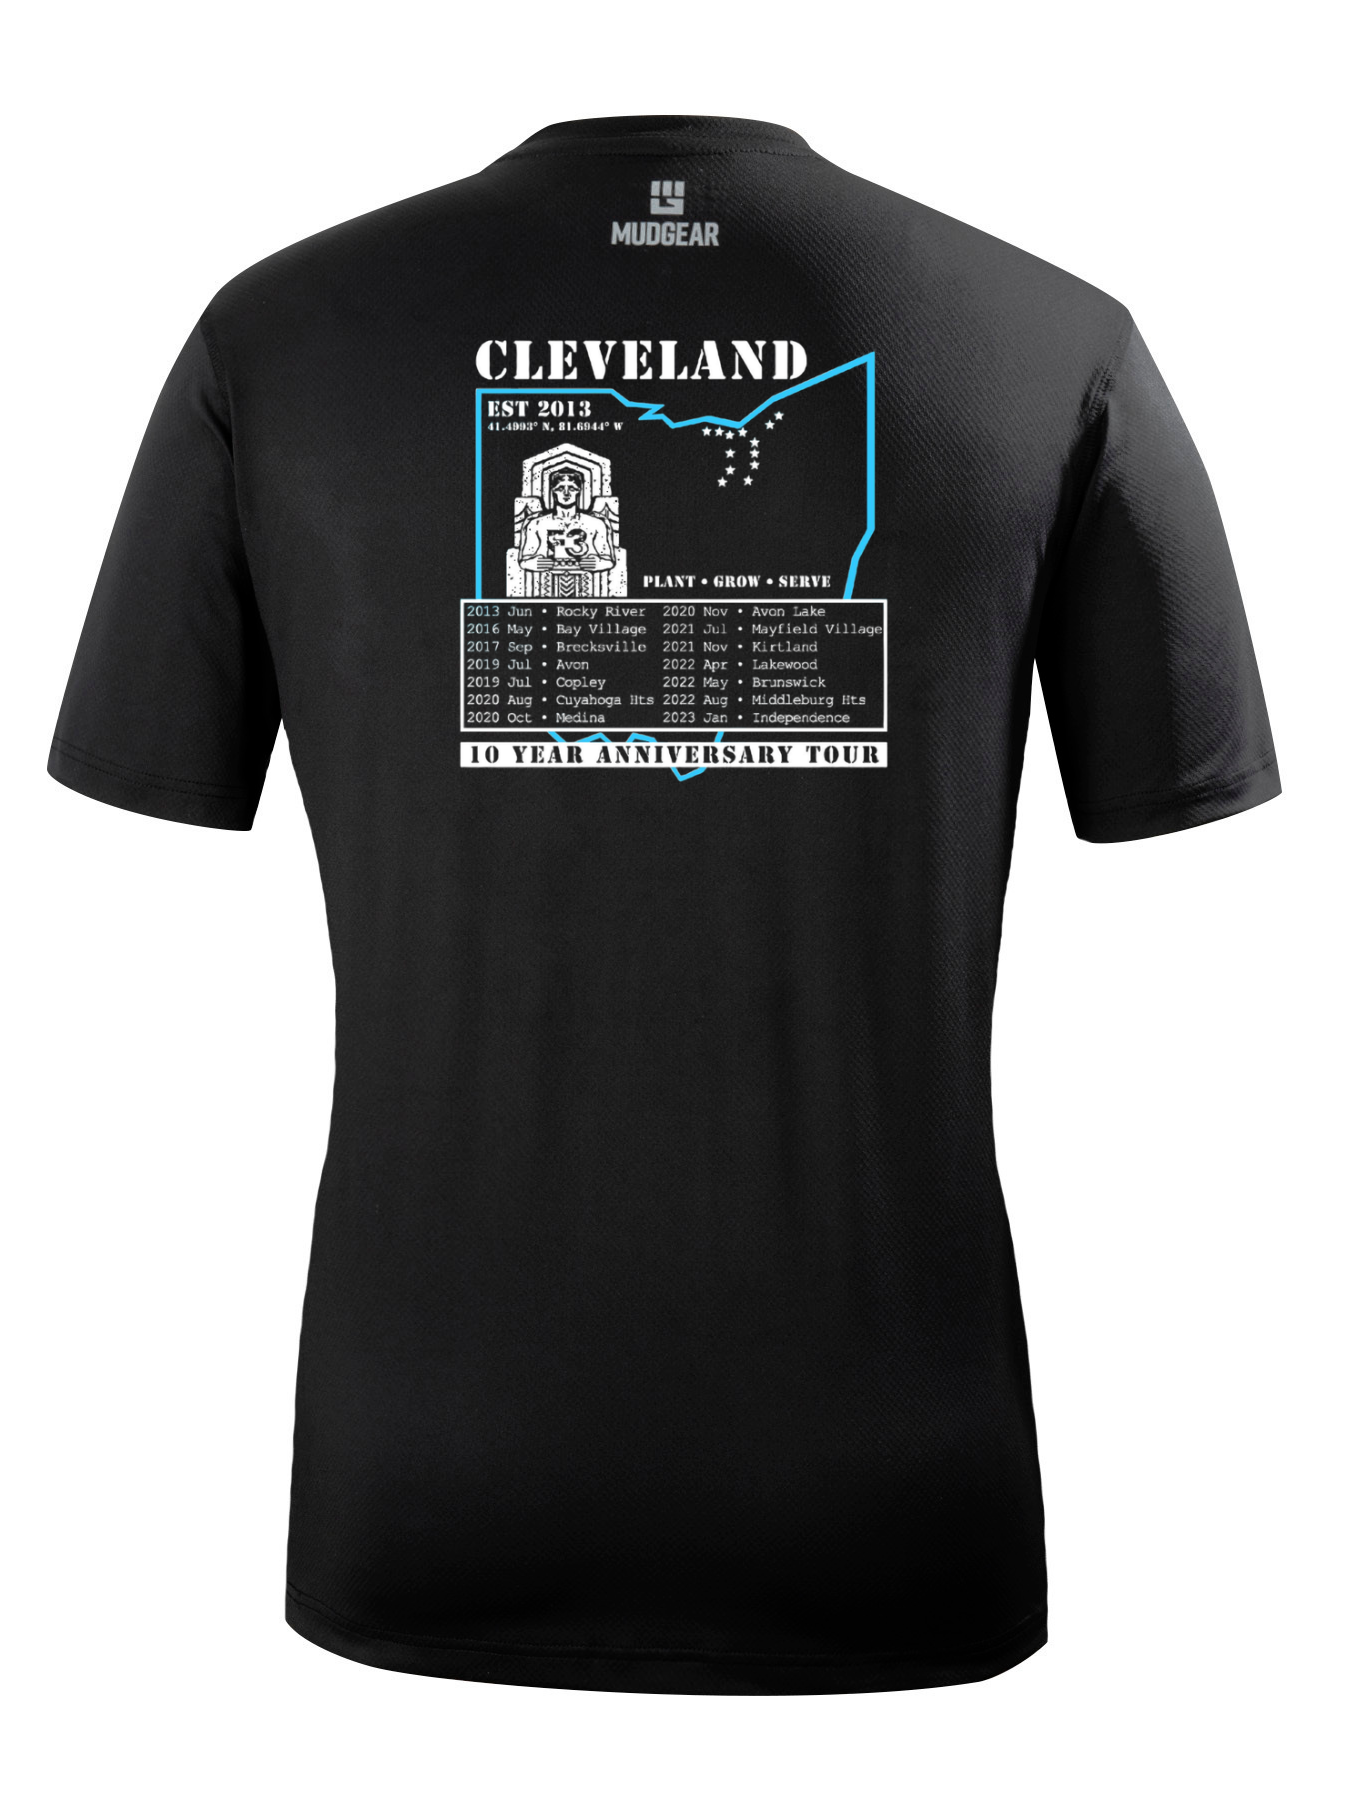 F3 Cleveland 10 Year Anniversary Pre-Order January 2023